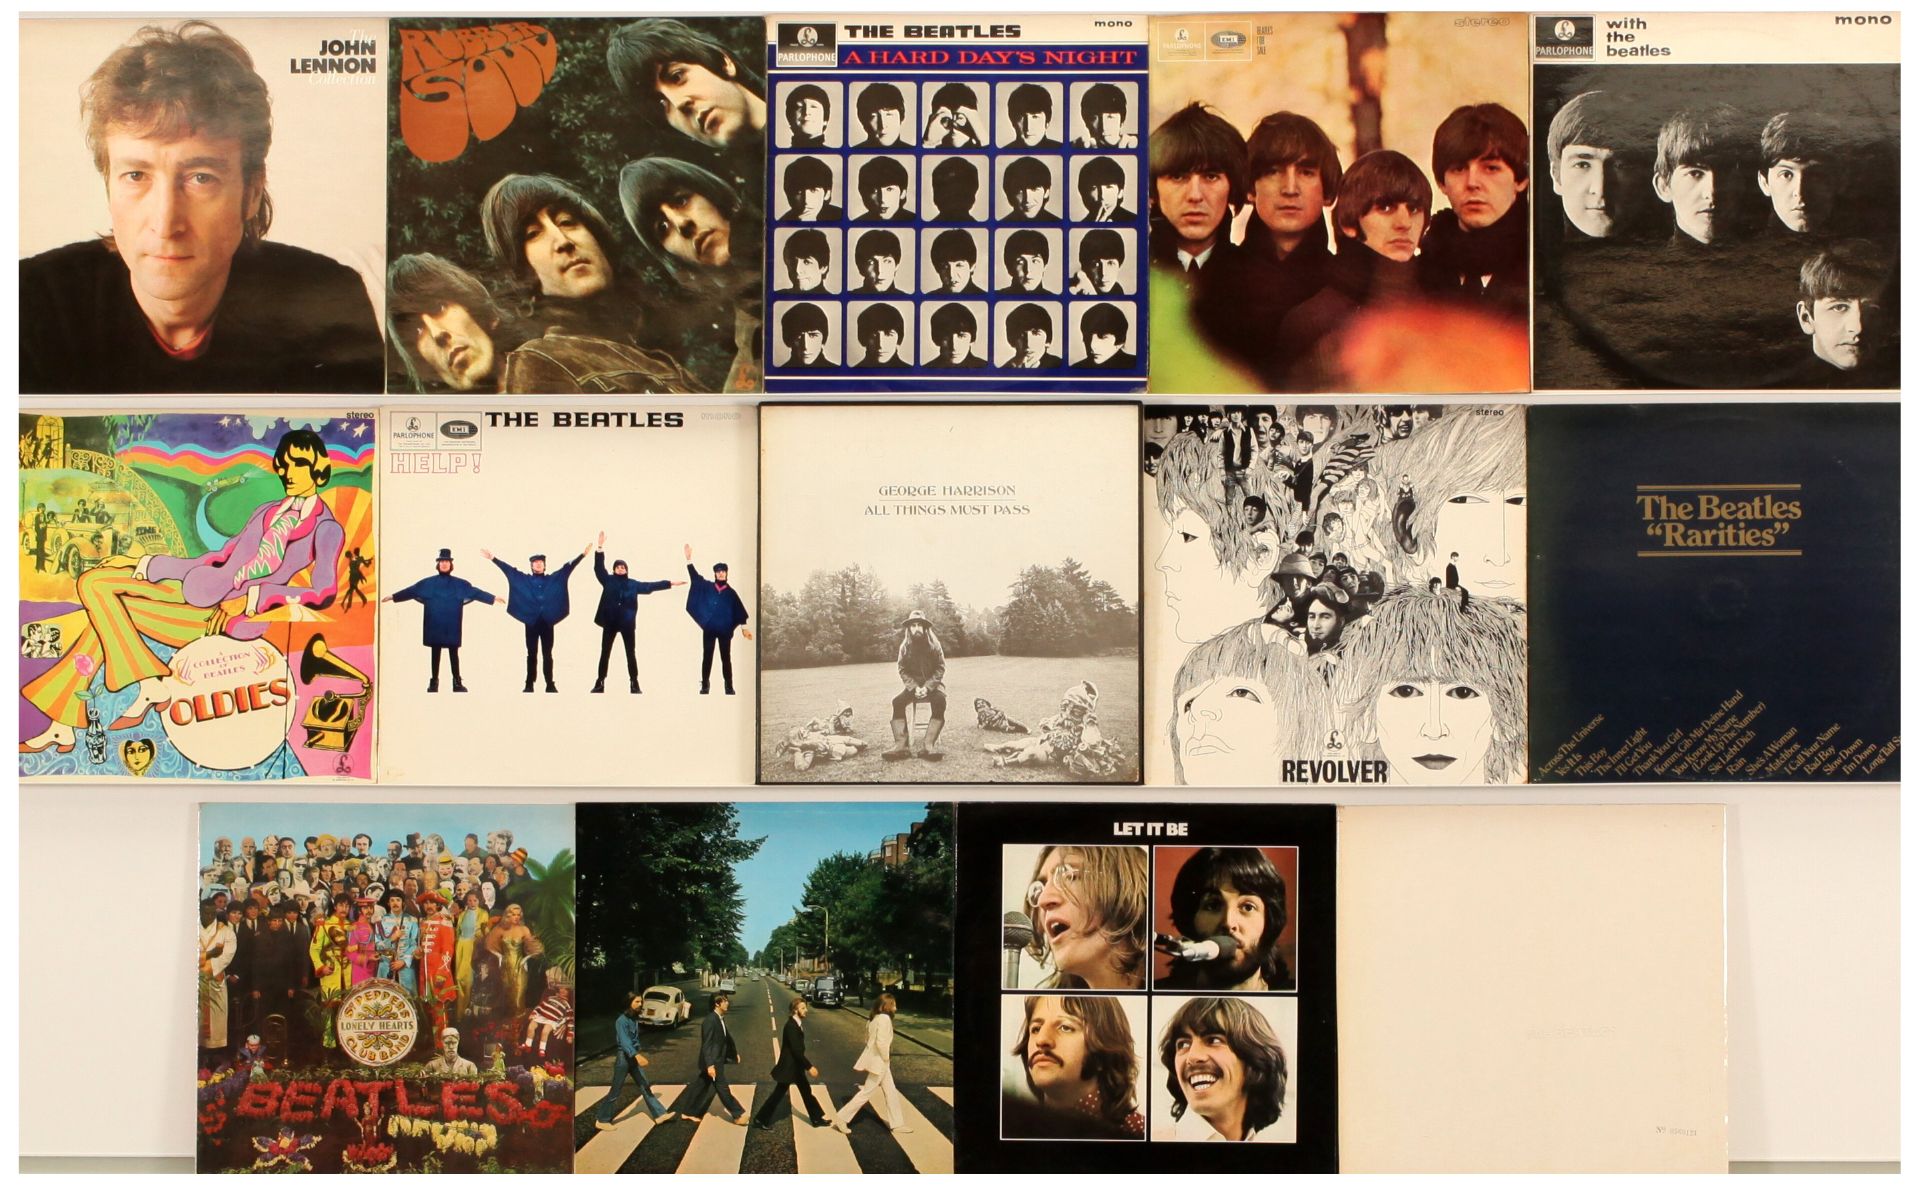 The Beatles and Related LPs